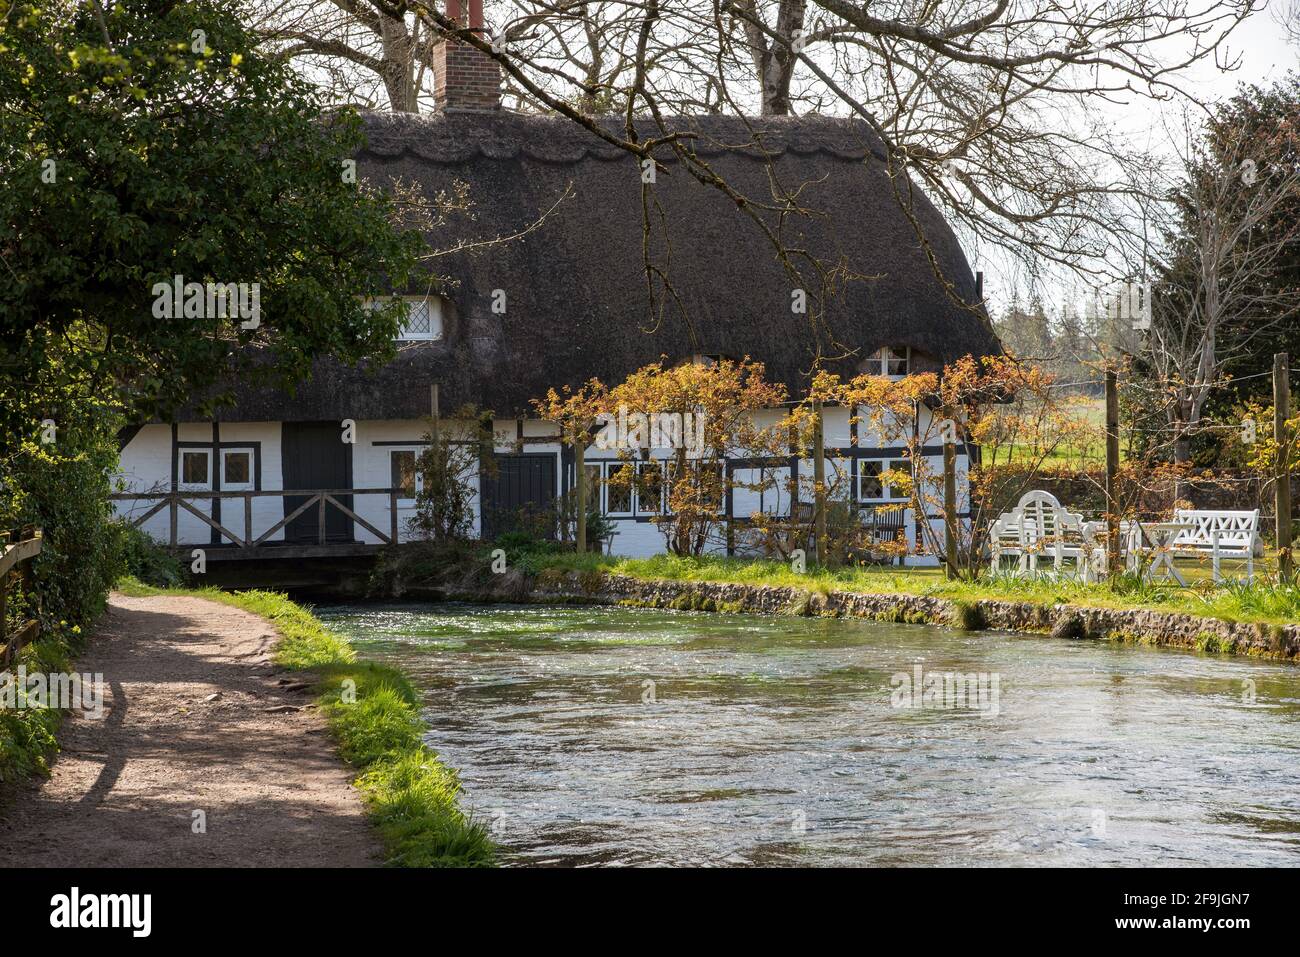 Alresford, Hampshire, England, UK. 2021,  The Fulling Mill a historic thatched building with the fast flowing River Arle passing below the building. R Stock Photo